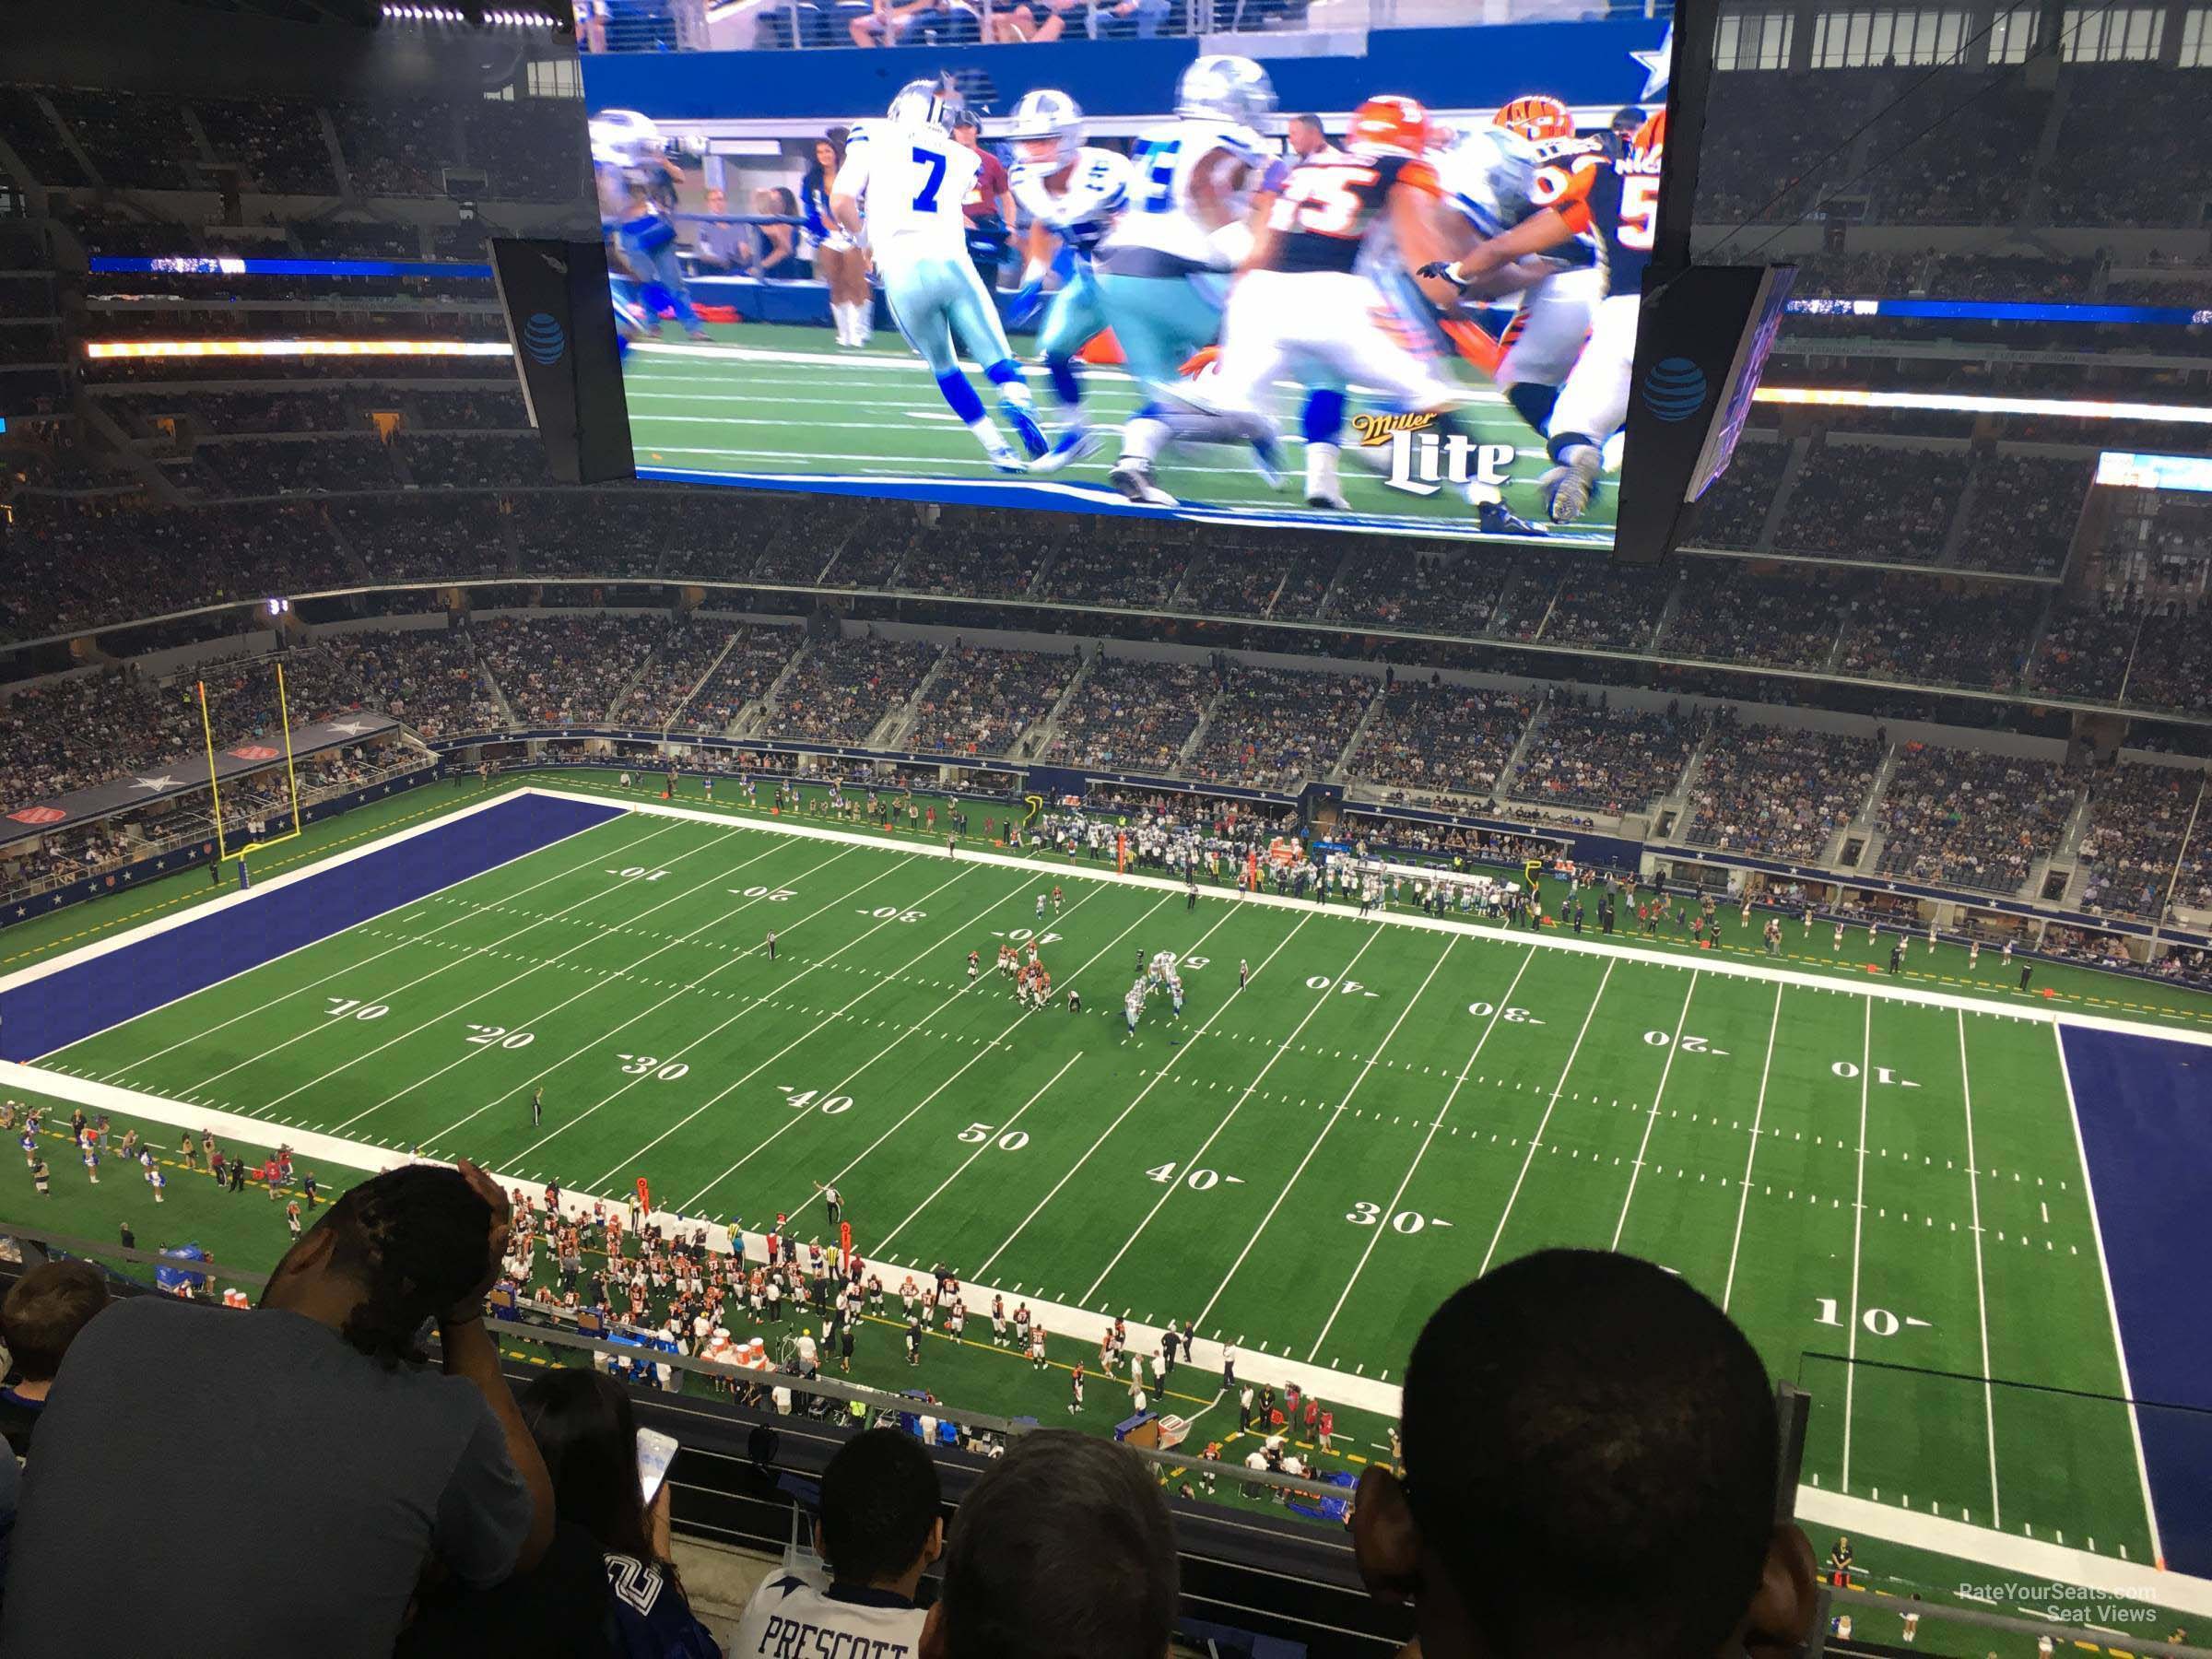 section 443, row 22 seat view  for football - at&t stadium (cowboys stadium)